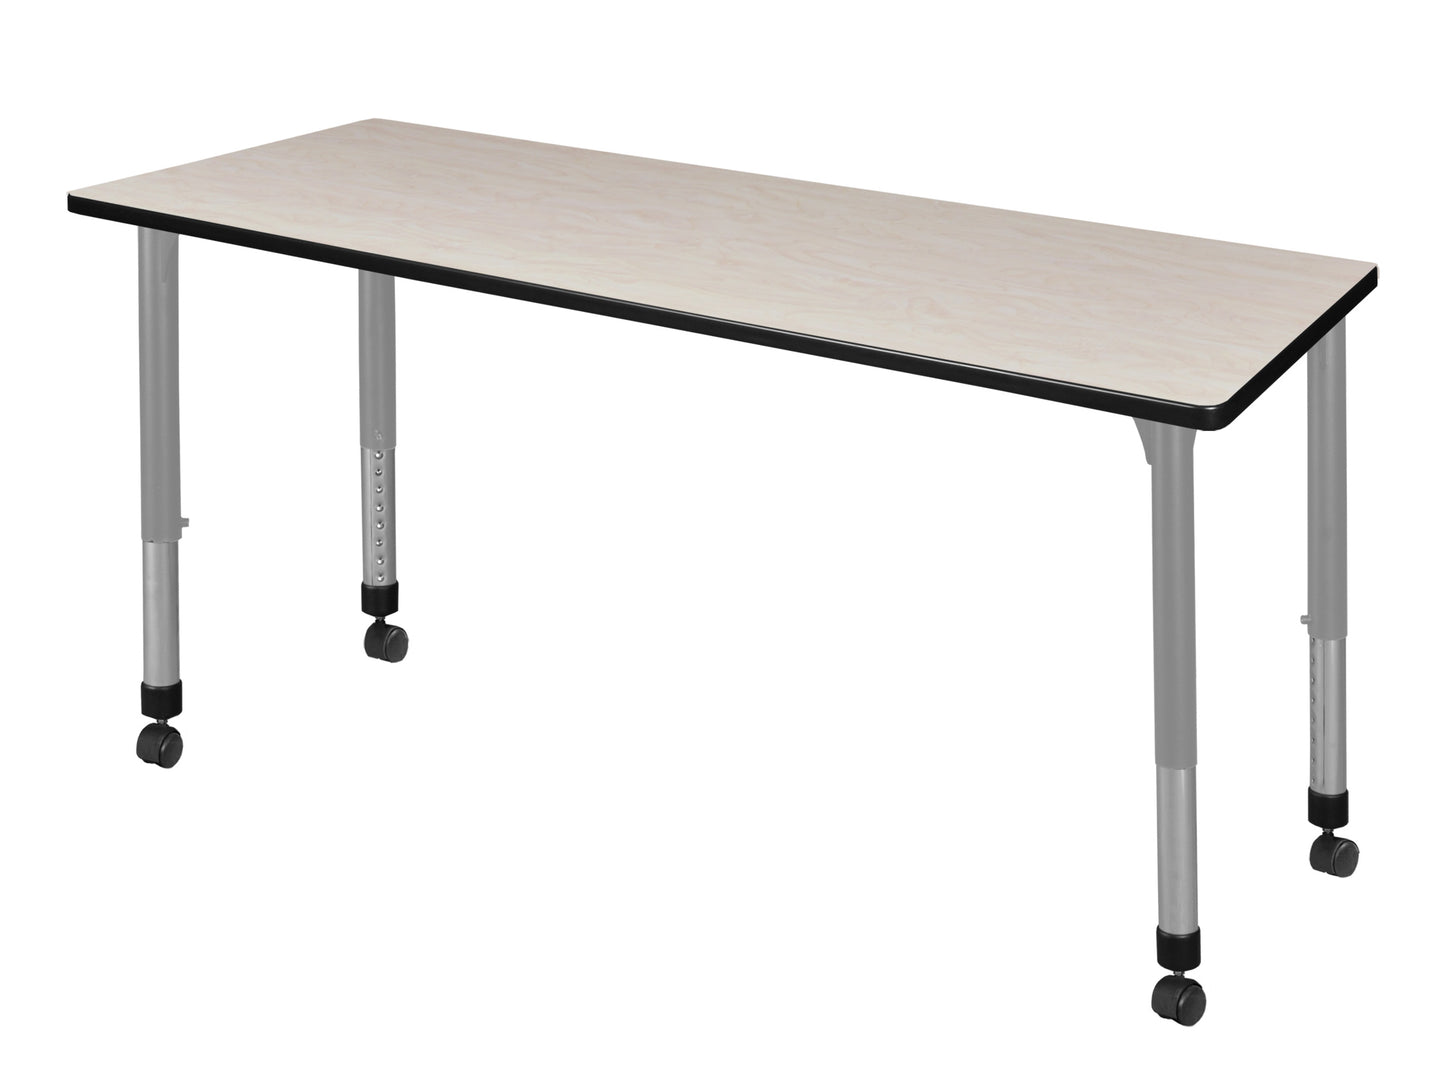 Regency Kee 66 x 30 in. Height Adjustable Mobile Classroom Activity Table